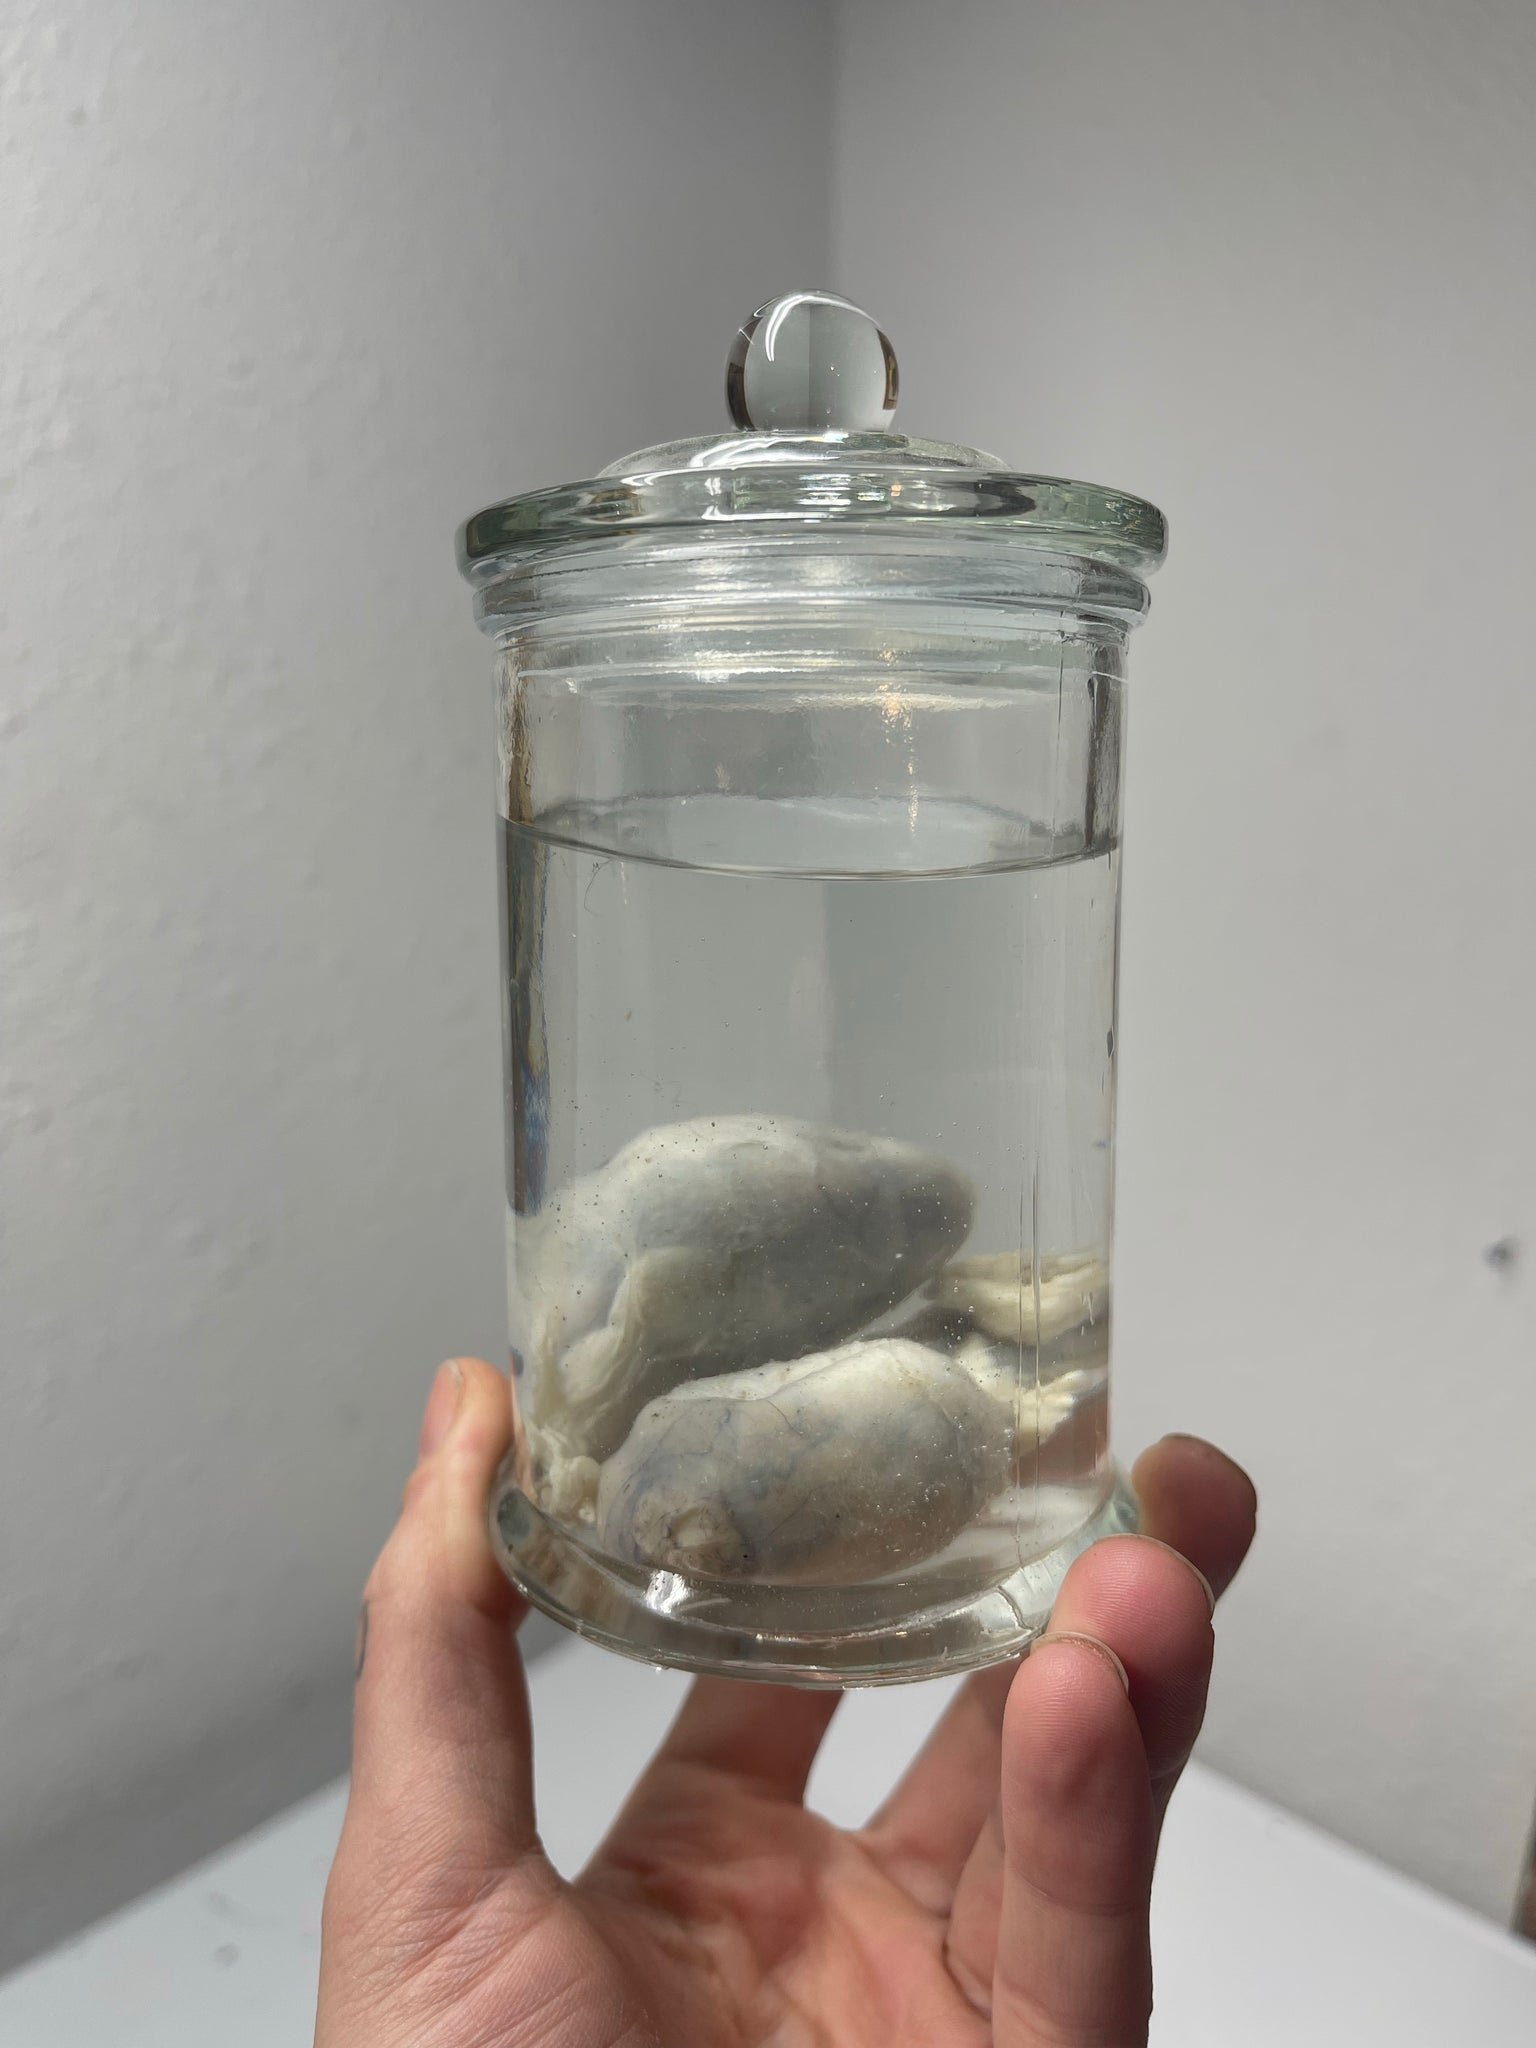 chase cowley recommends Picture Of Testicles In A Jar